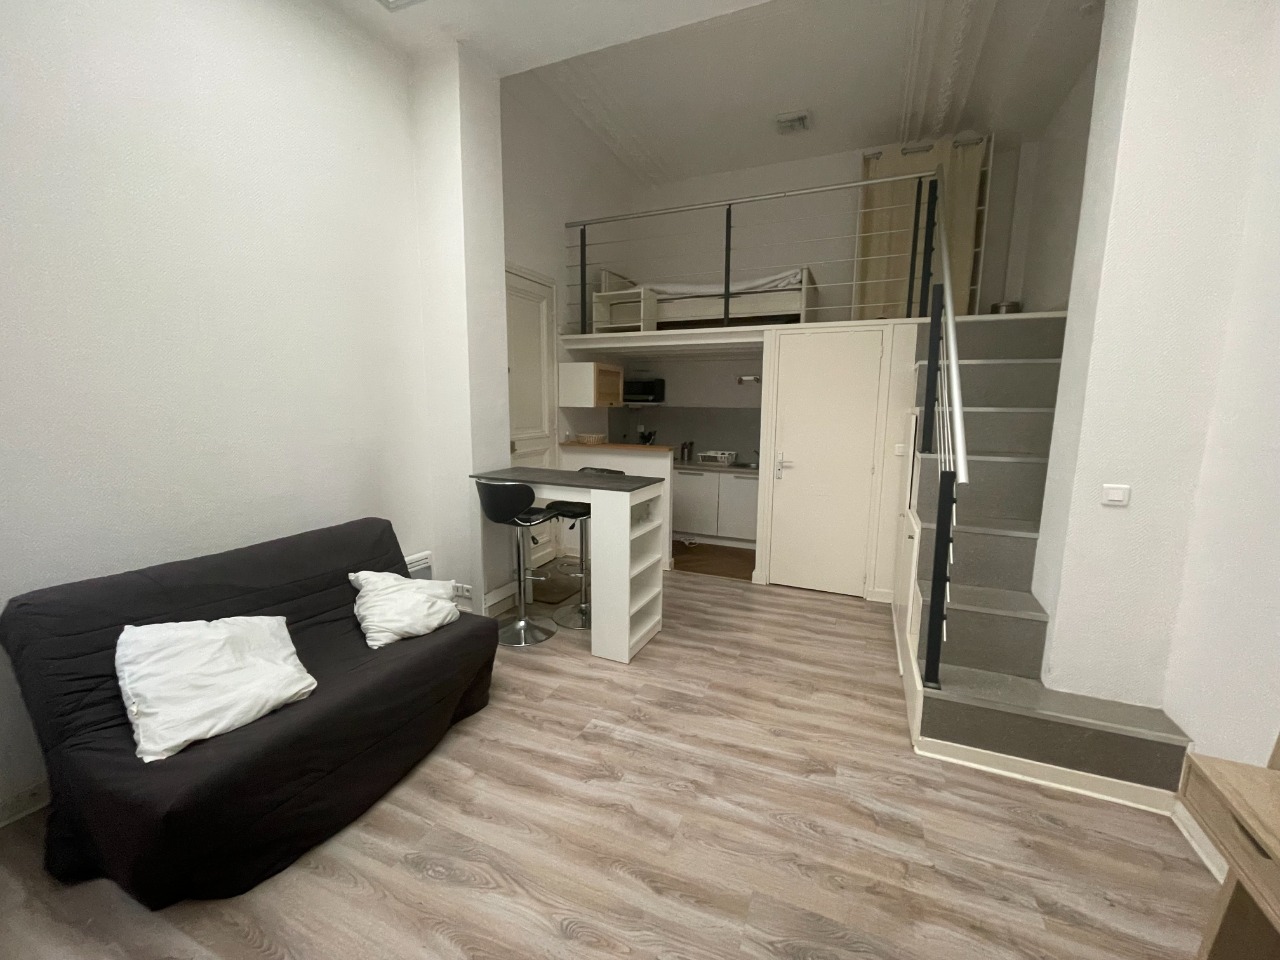 Grand studio   cour rue nationale Photo 2 - JLW Immobilier